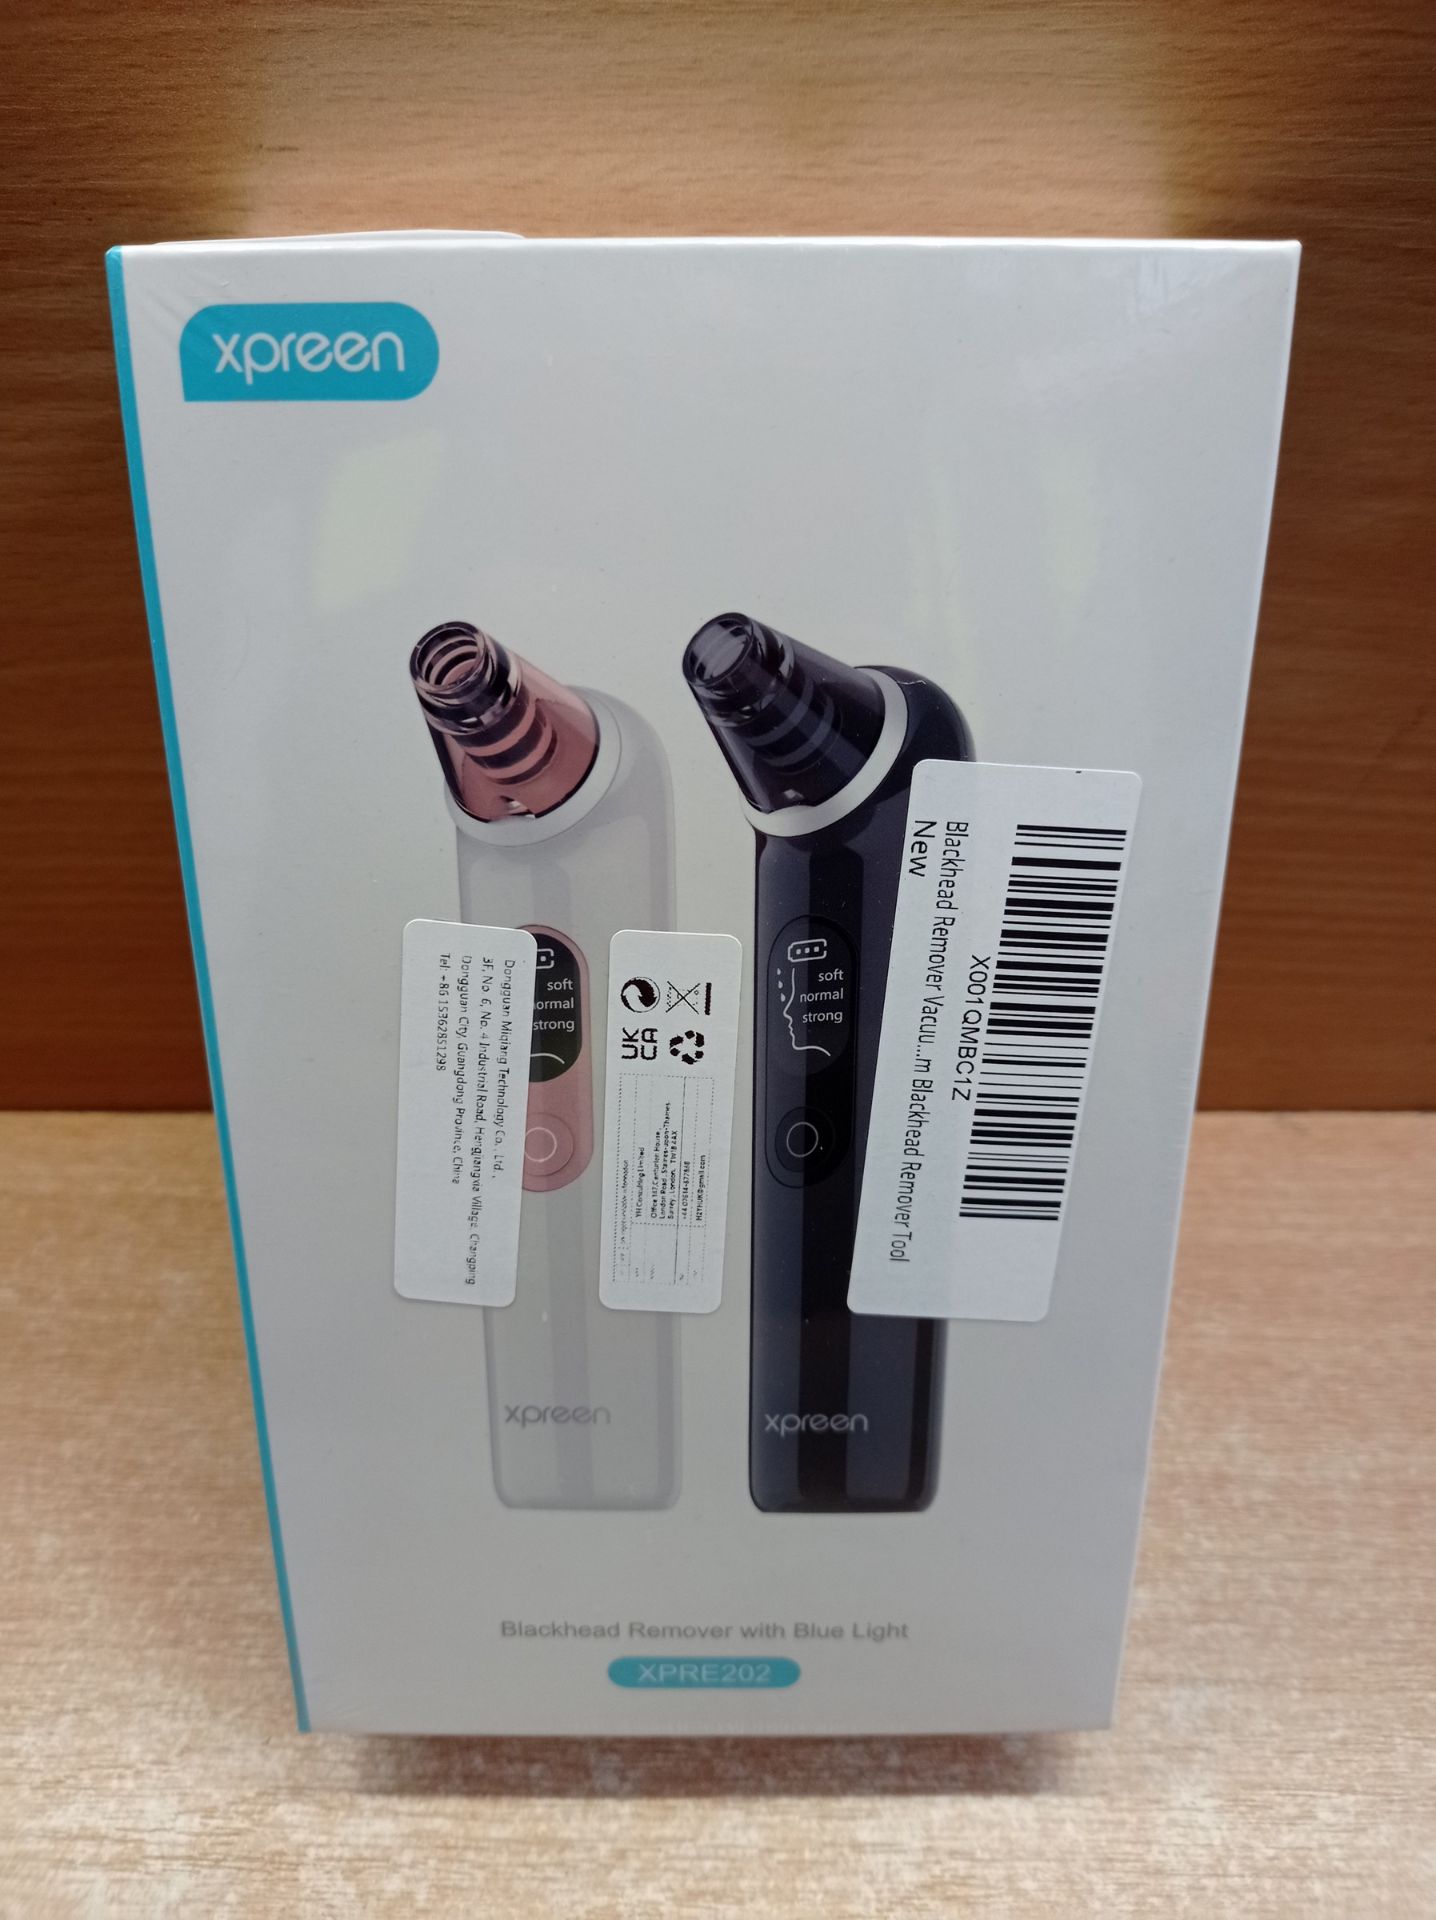 RRP £22.82 BRAND NEW STOCK Blackhead Remover Vacuum with Blue Light - Image 2 of 2